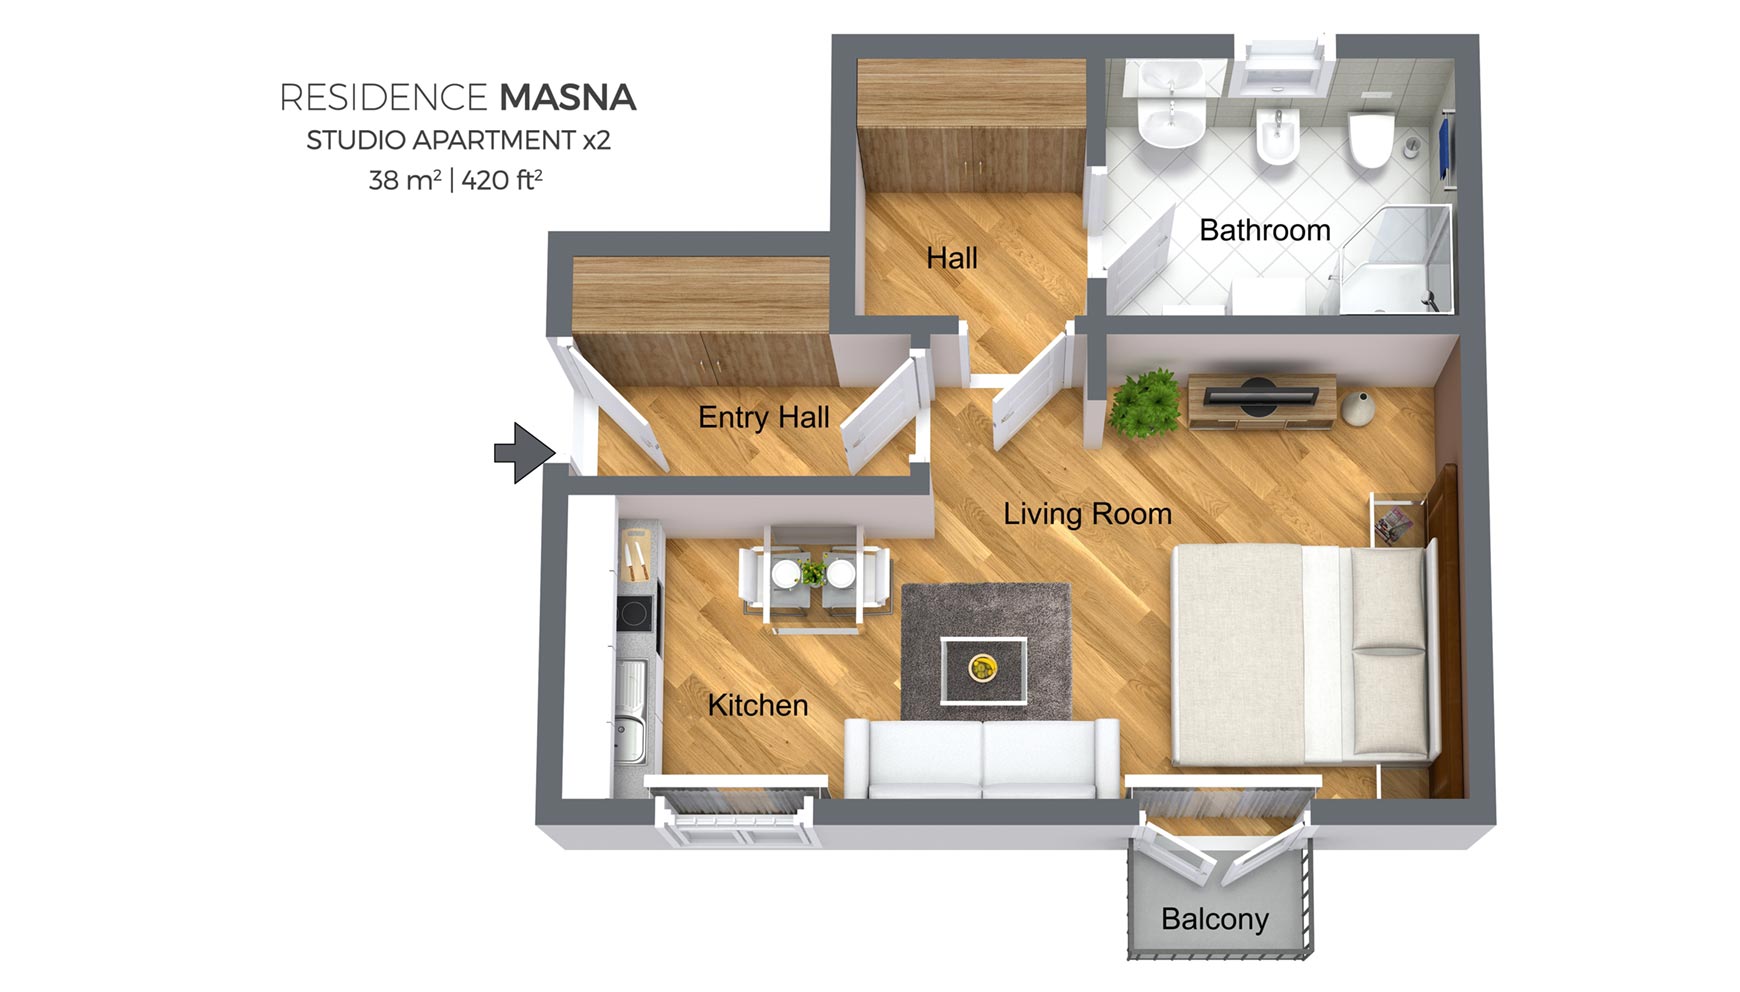 Floorplan of a studio apartment type 2 in Residence Masna